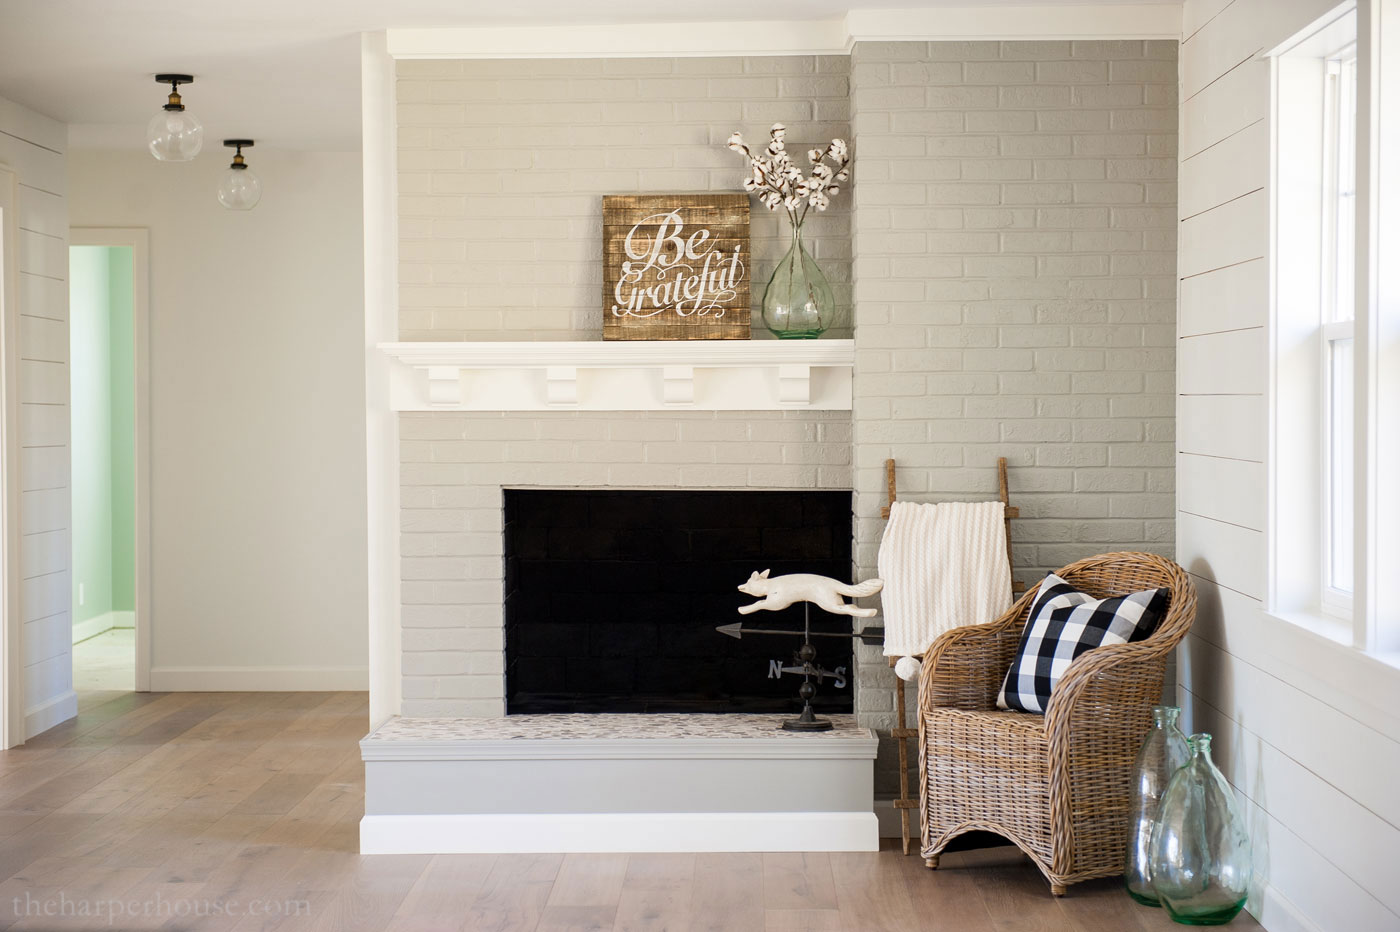 How To Cover A Brick Fireplace